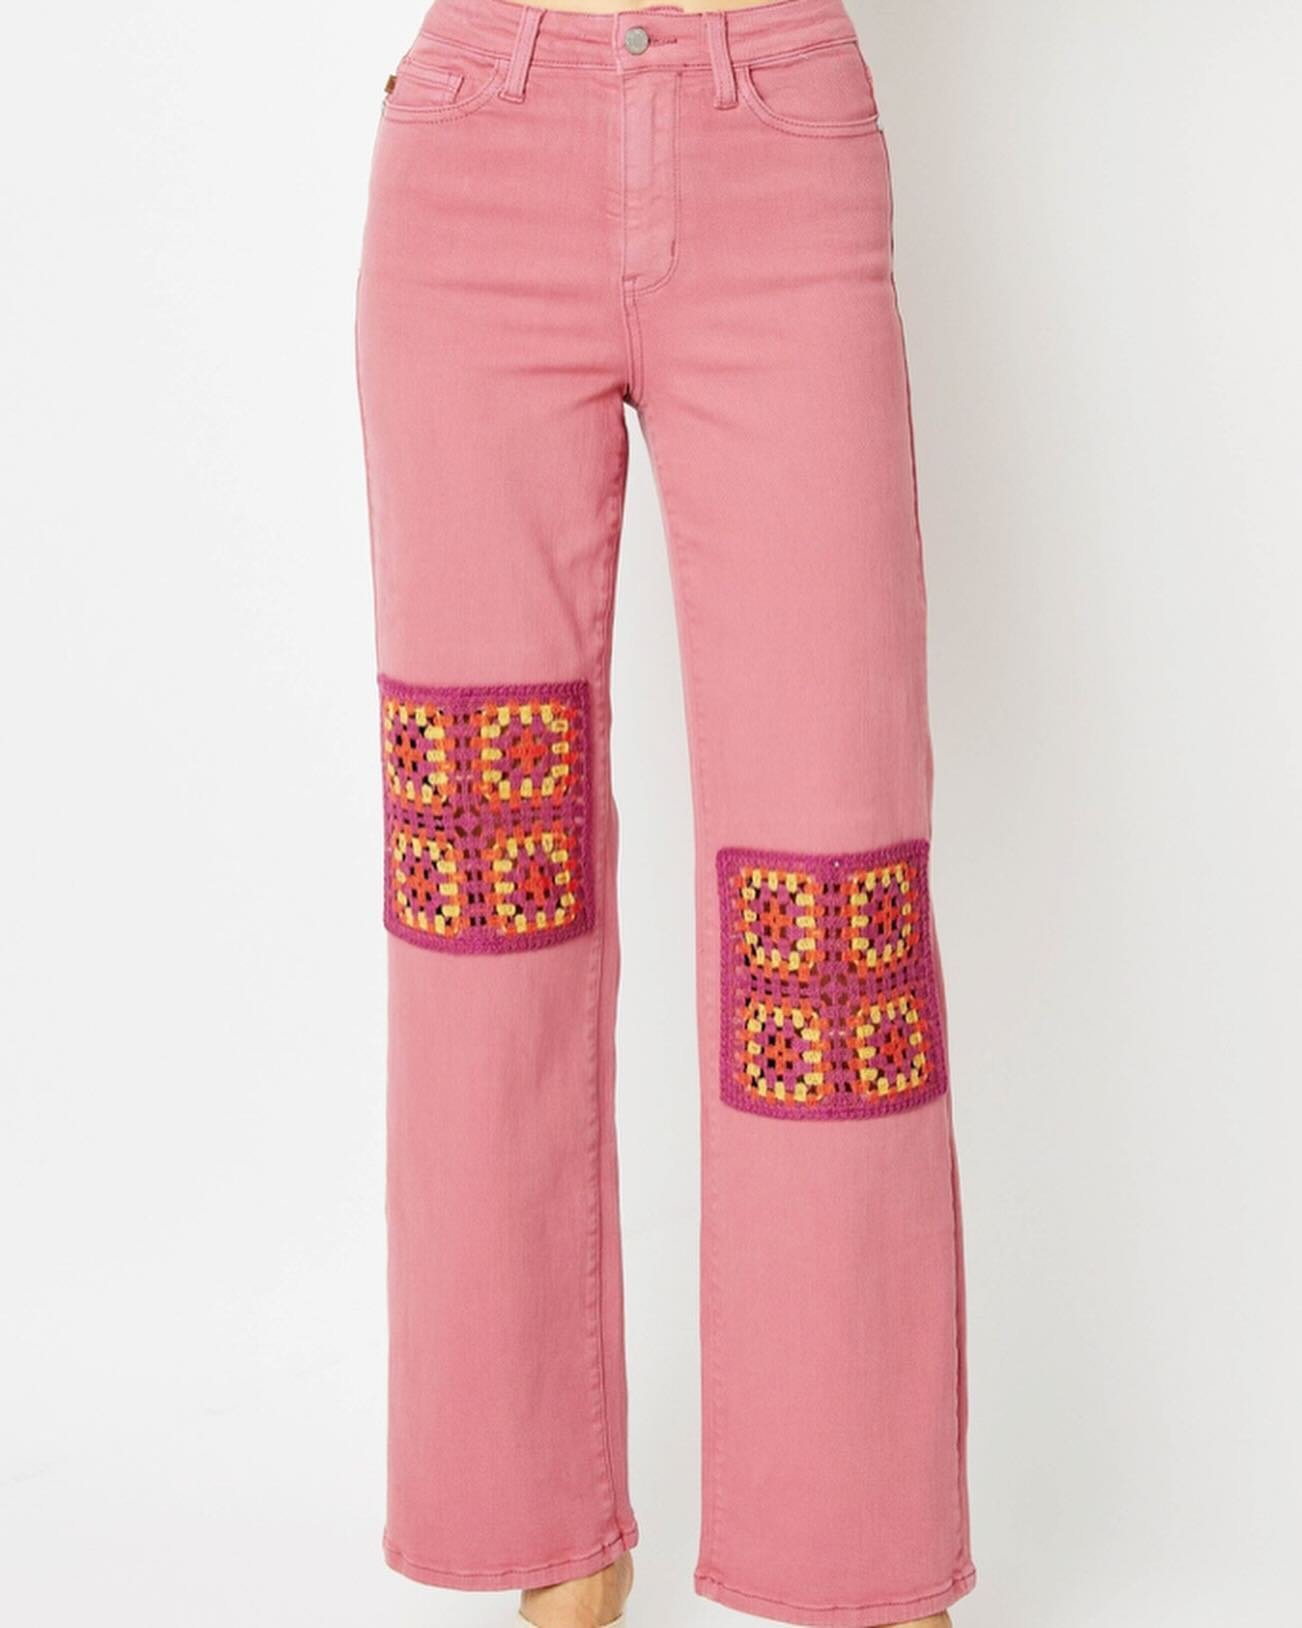 💕NEW!💕 in our booth at @southernlioncharlotte Judy Blue high waist dusty pink crochet patch wide leg jeans! Available in sizes 0-24!